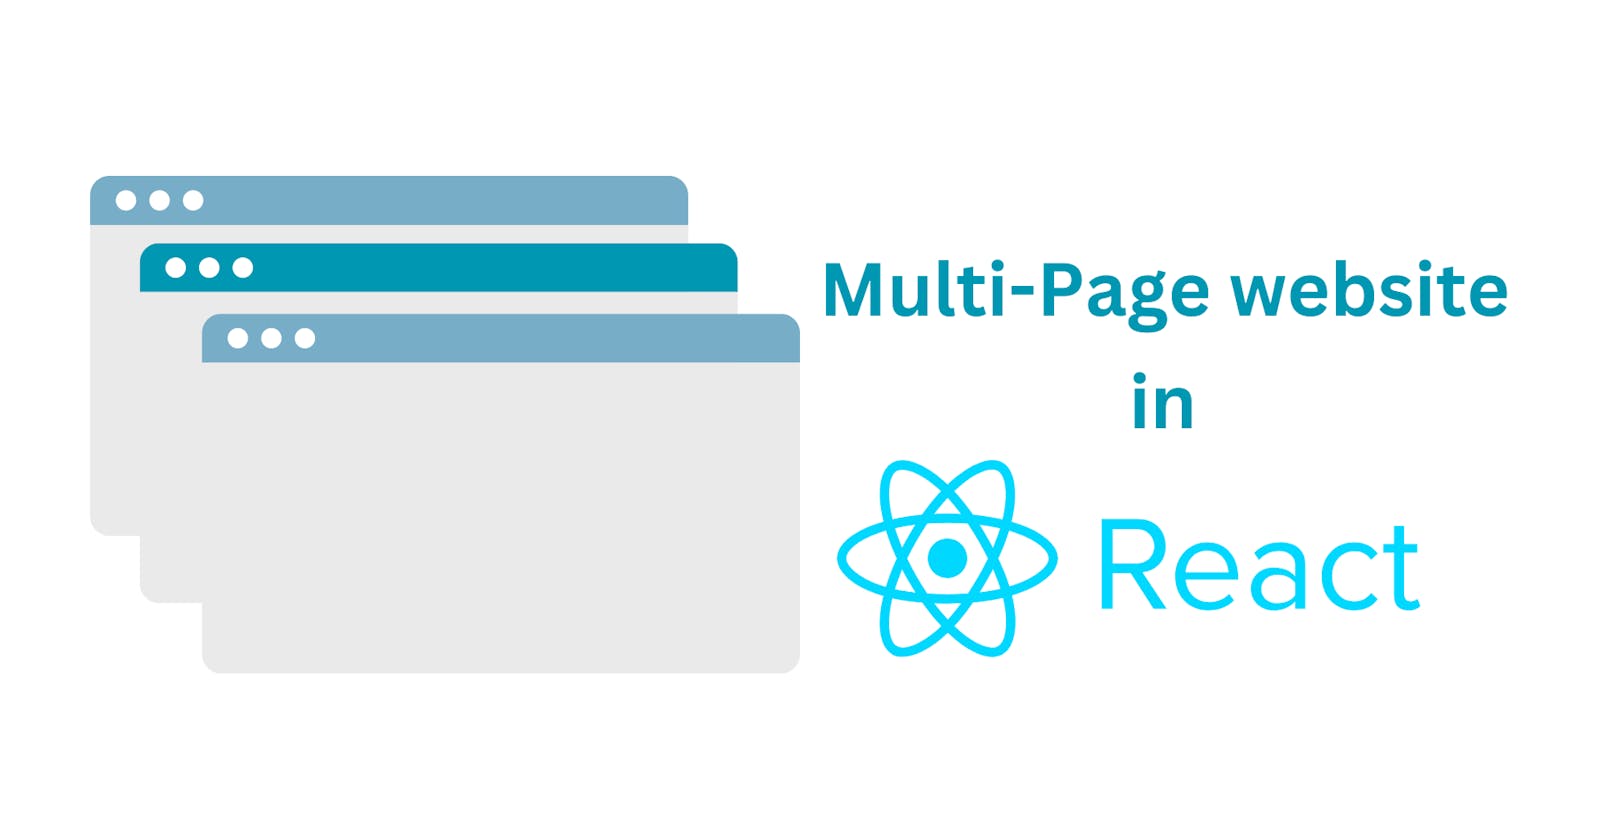 How to create a multi-page website in React ?